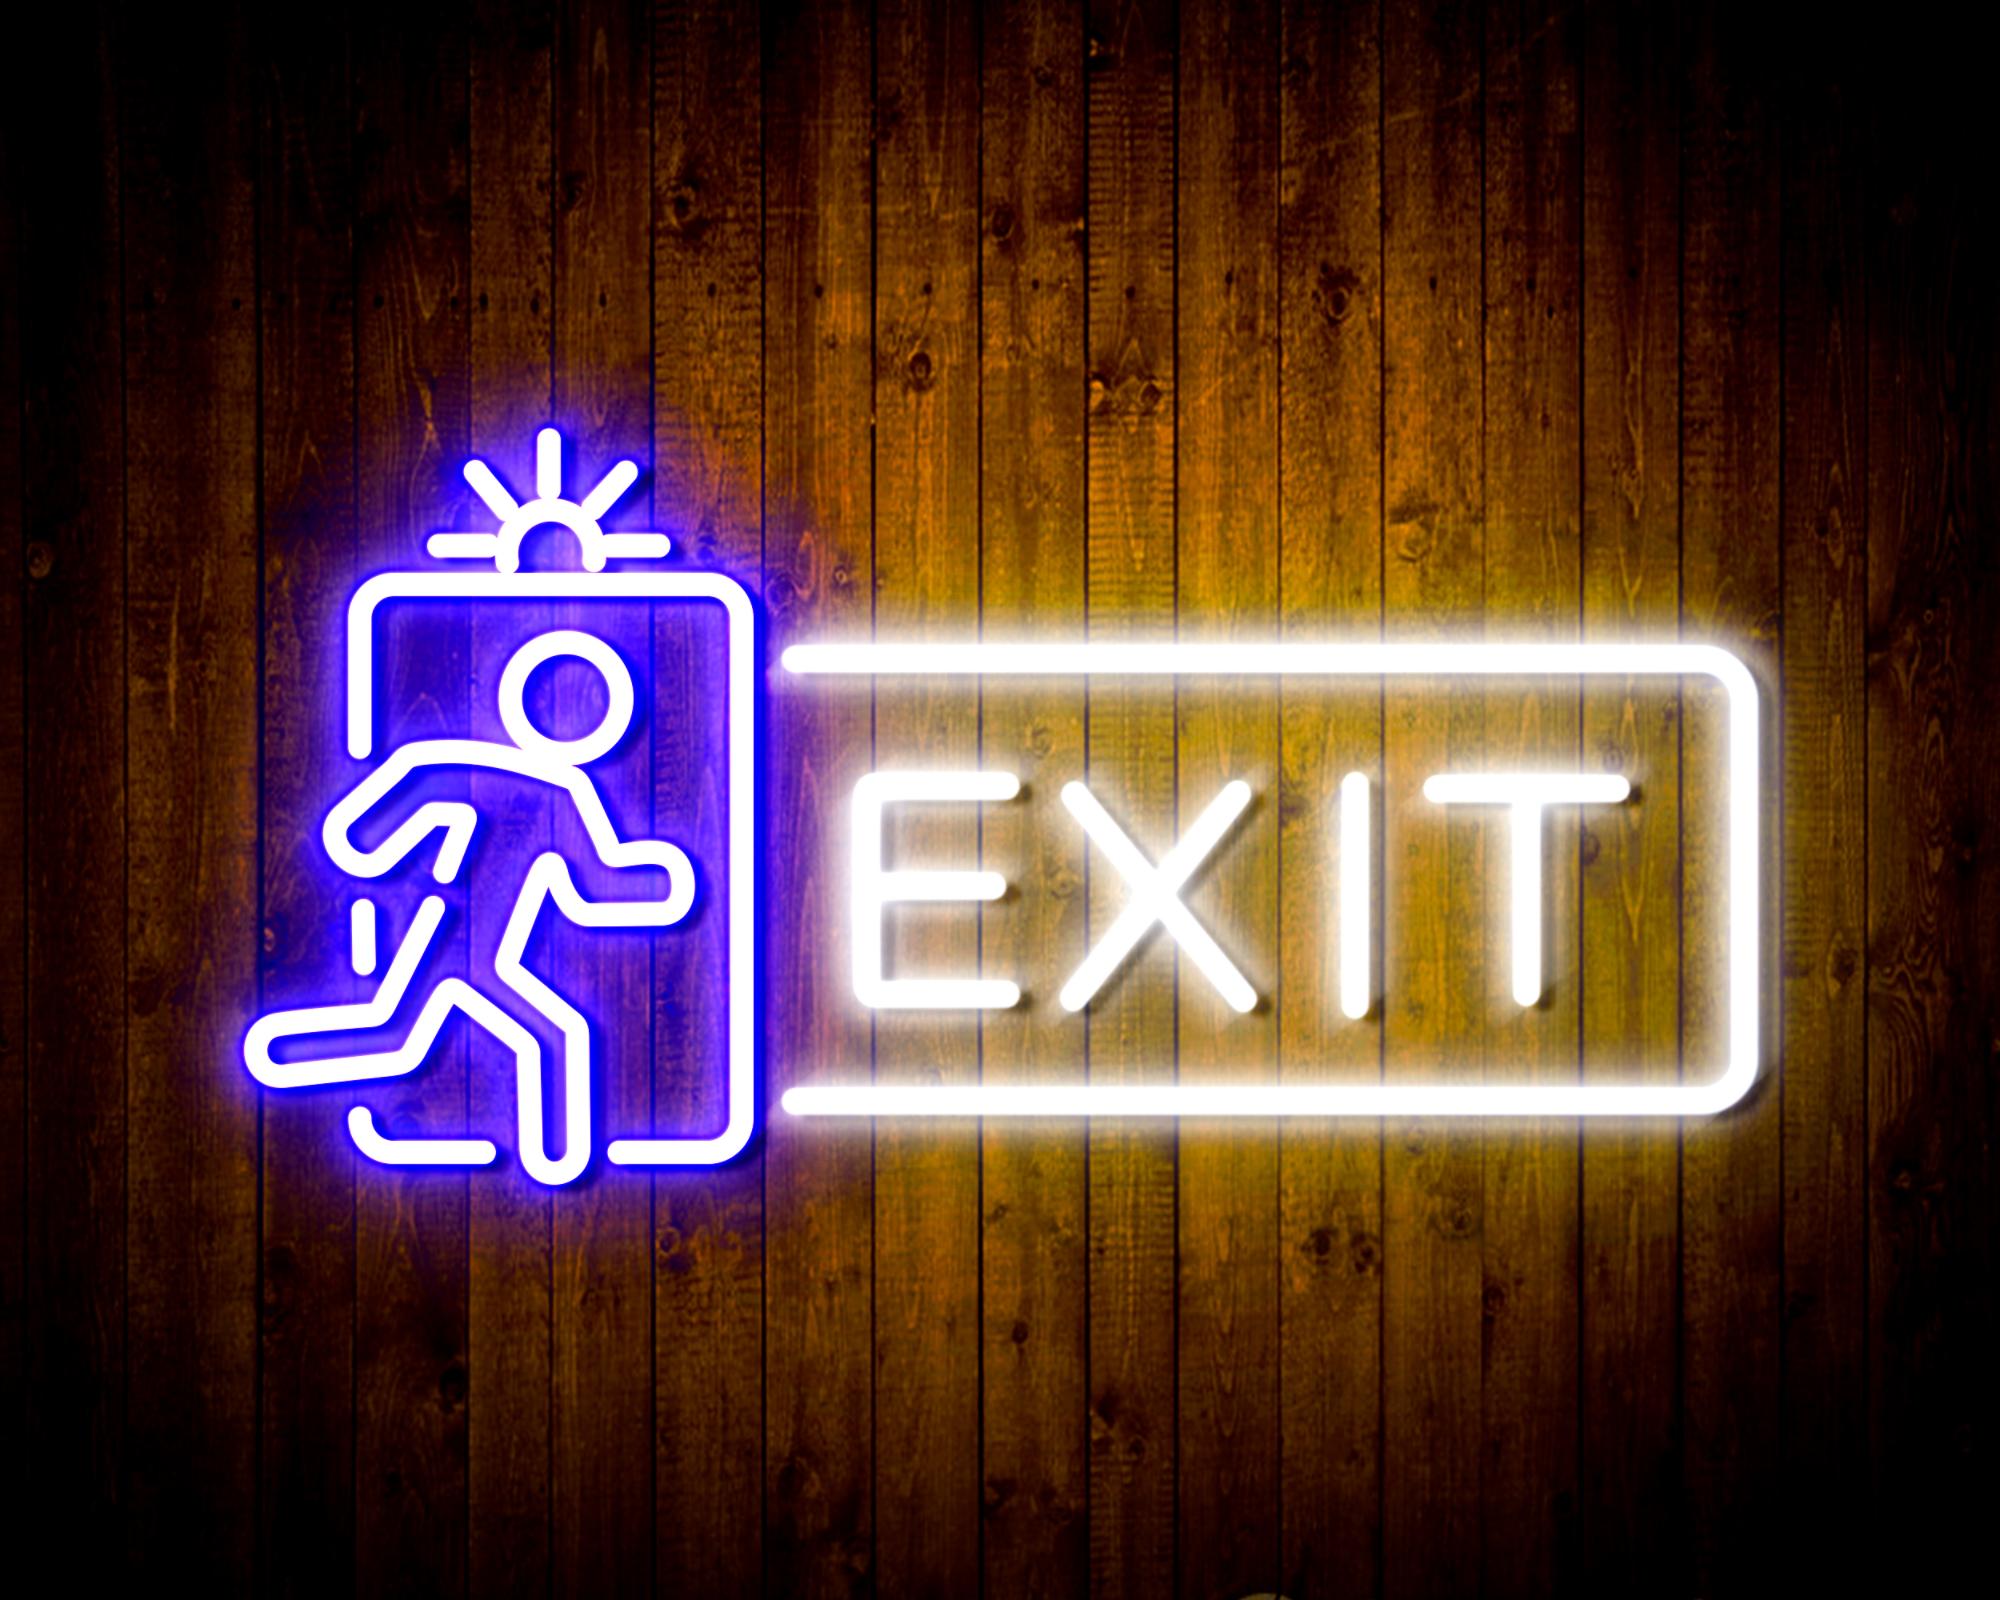 Exit Sign LED Neon Sign Wall Light